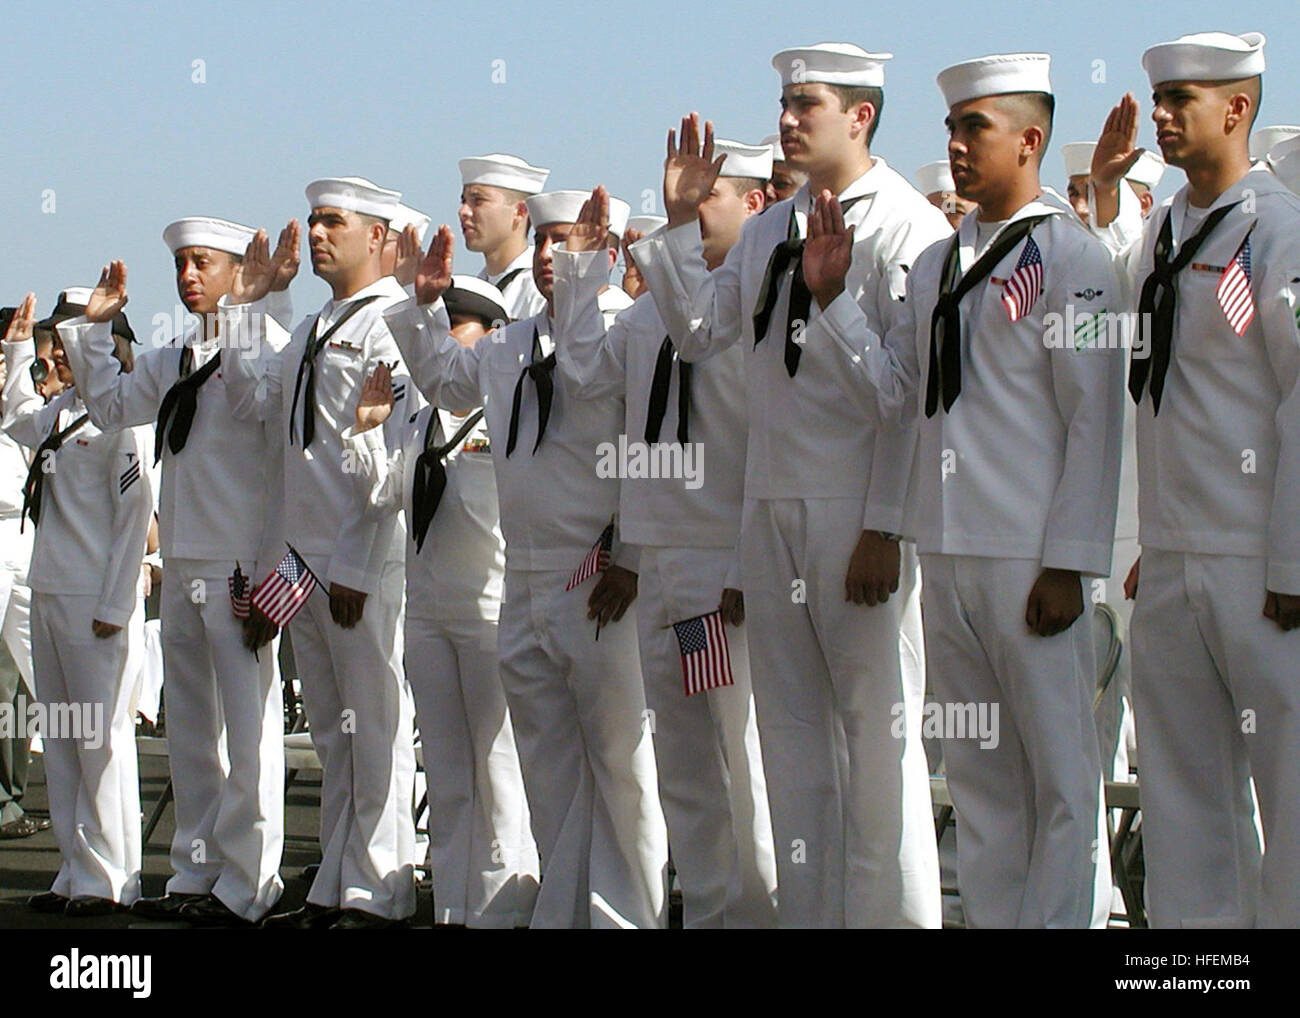 030702-N-9076B-001 Naval Air Station North Island, Calif. (Jul. 2, 2003) -- Sailors and U.S. Marines take the Oath of Citizenship held on the flight deck aboard USS Constellation (CV 64). Over 170 individuals from 35 different countries took the oath to become U.S. Citizens.   Constellation recently returned from a Western Pacific deployment in support of Operations Southern Watch, Enduring Freedom and Iraqi Freedom.  U.S. Navy photo by Chief PhotographerÕs Mate Donald Bray.  (RELEASED) US Navy 030702-N-9076B-001 Sailors and U.S. Marines take the Oath of Citizenship held on the flight deck abo Stock Photo